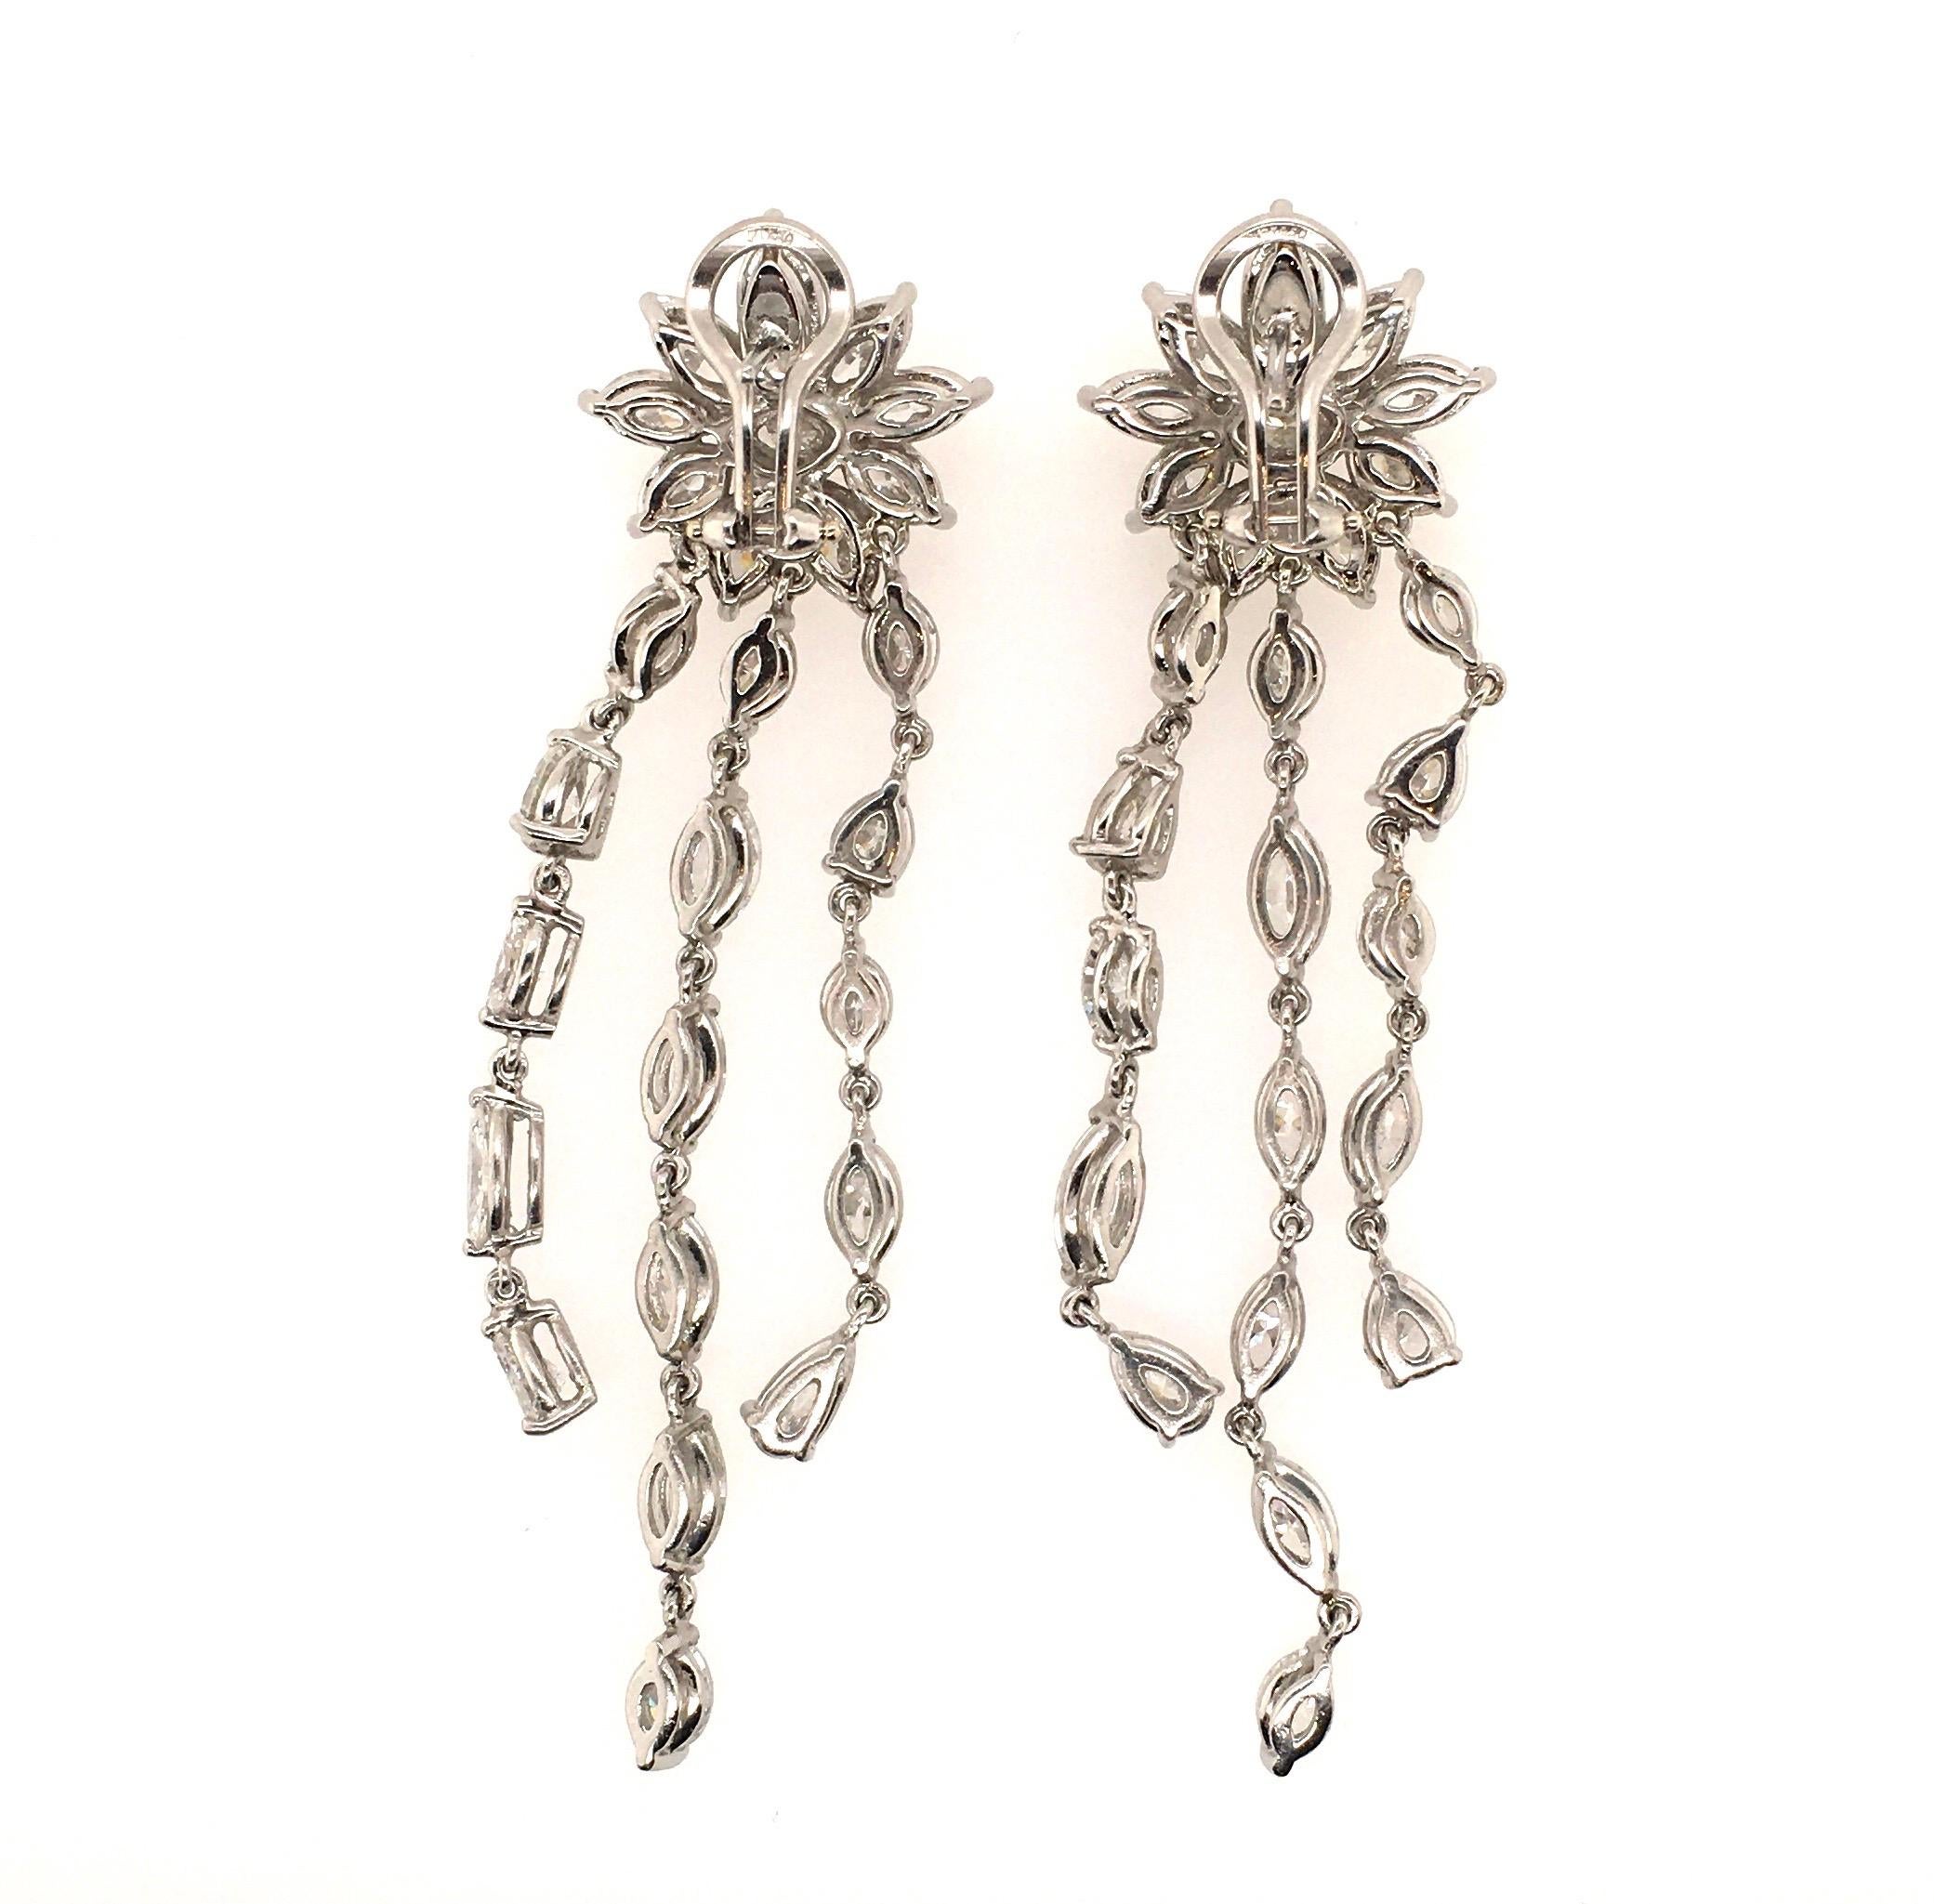 A pair of 18 karat white gold and diamond earrings.  Designed as a marquise and circular cut diamond florets, suspending marquises and pear shaped diamond fringe. Fifty four (54) diamonds weigh approximately 13.94 carats. Length is approximately 3